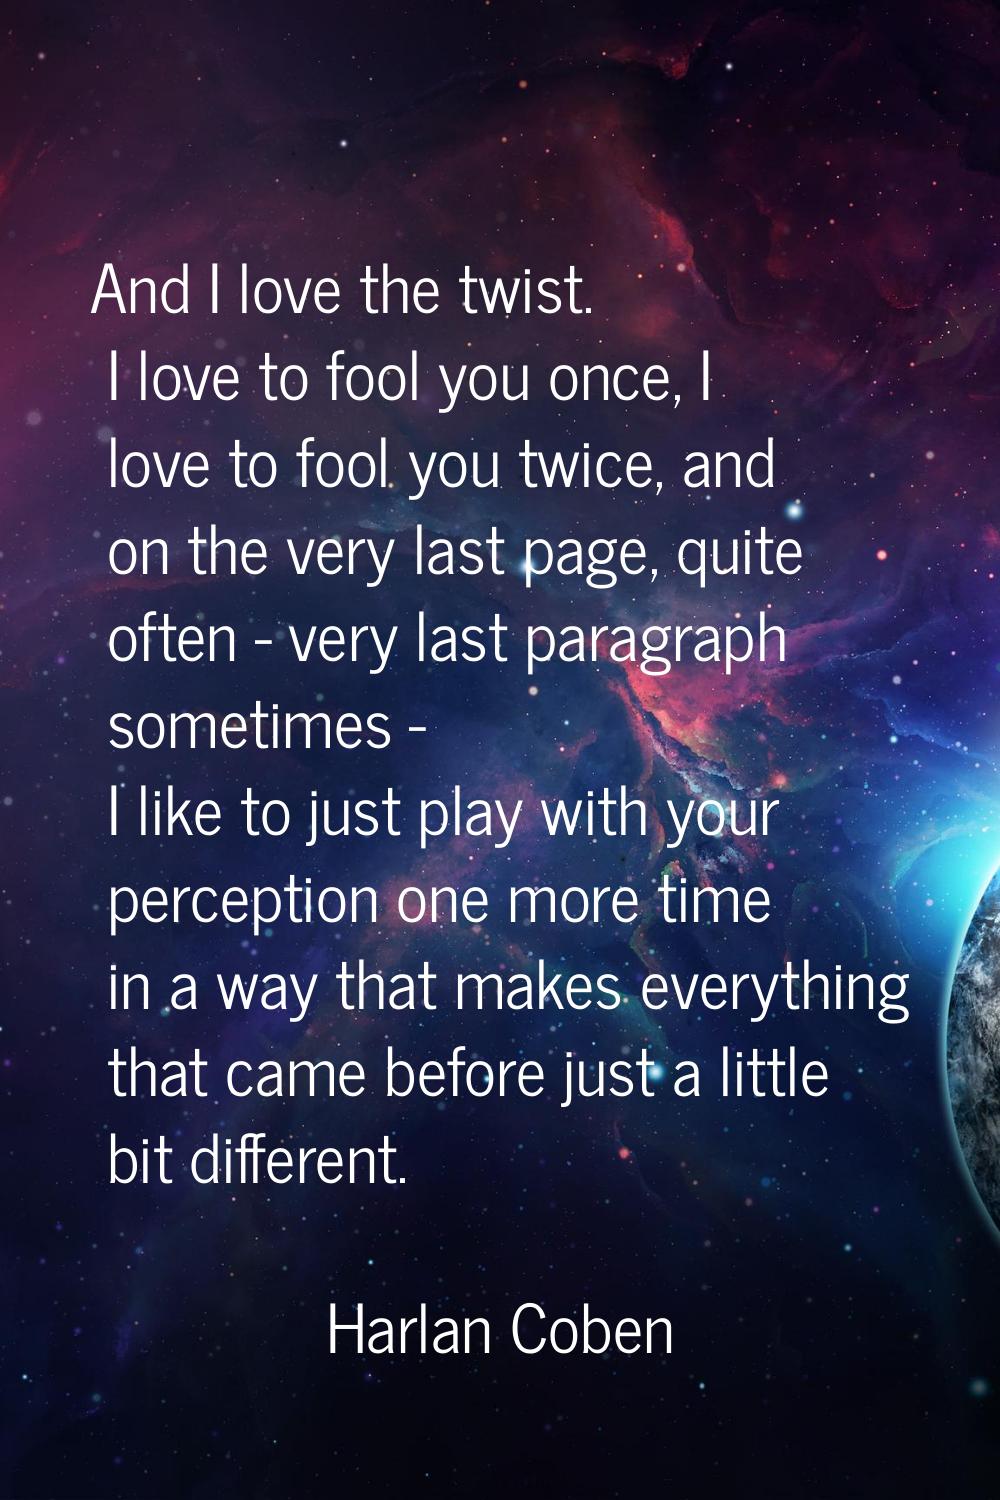 And I love the twist. I love to fool you once, I love to fool you twice, and on the very last page,